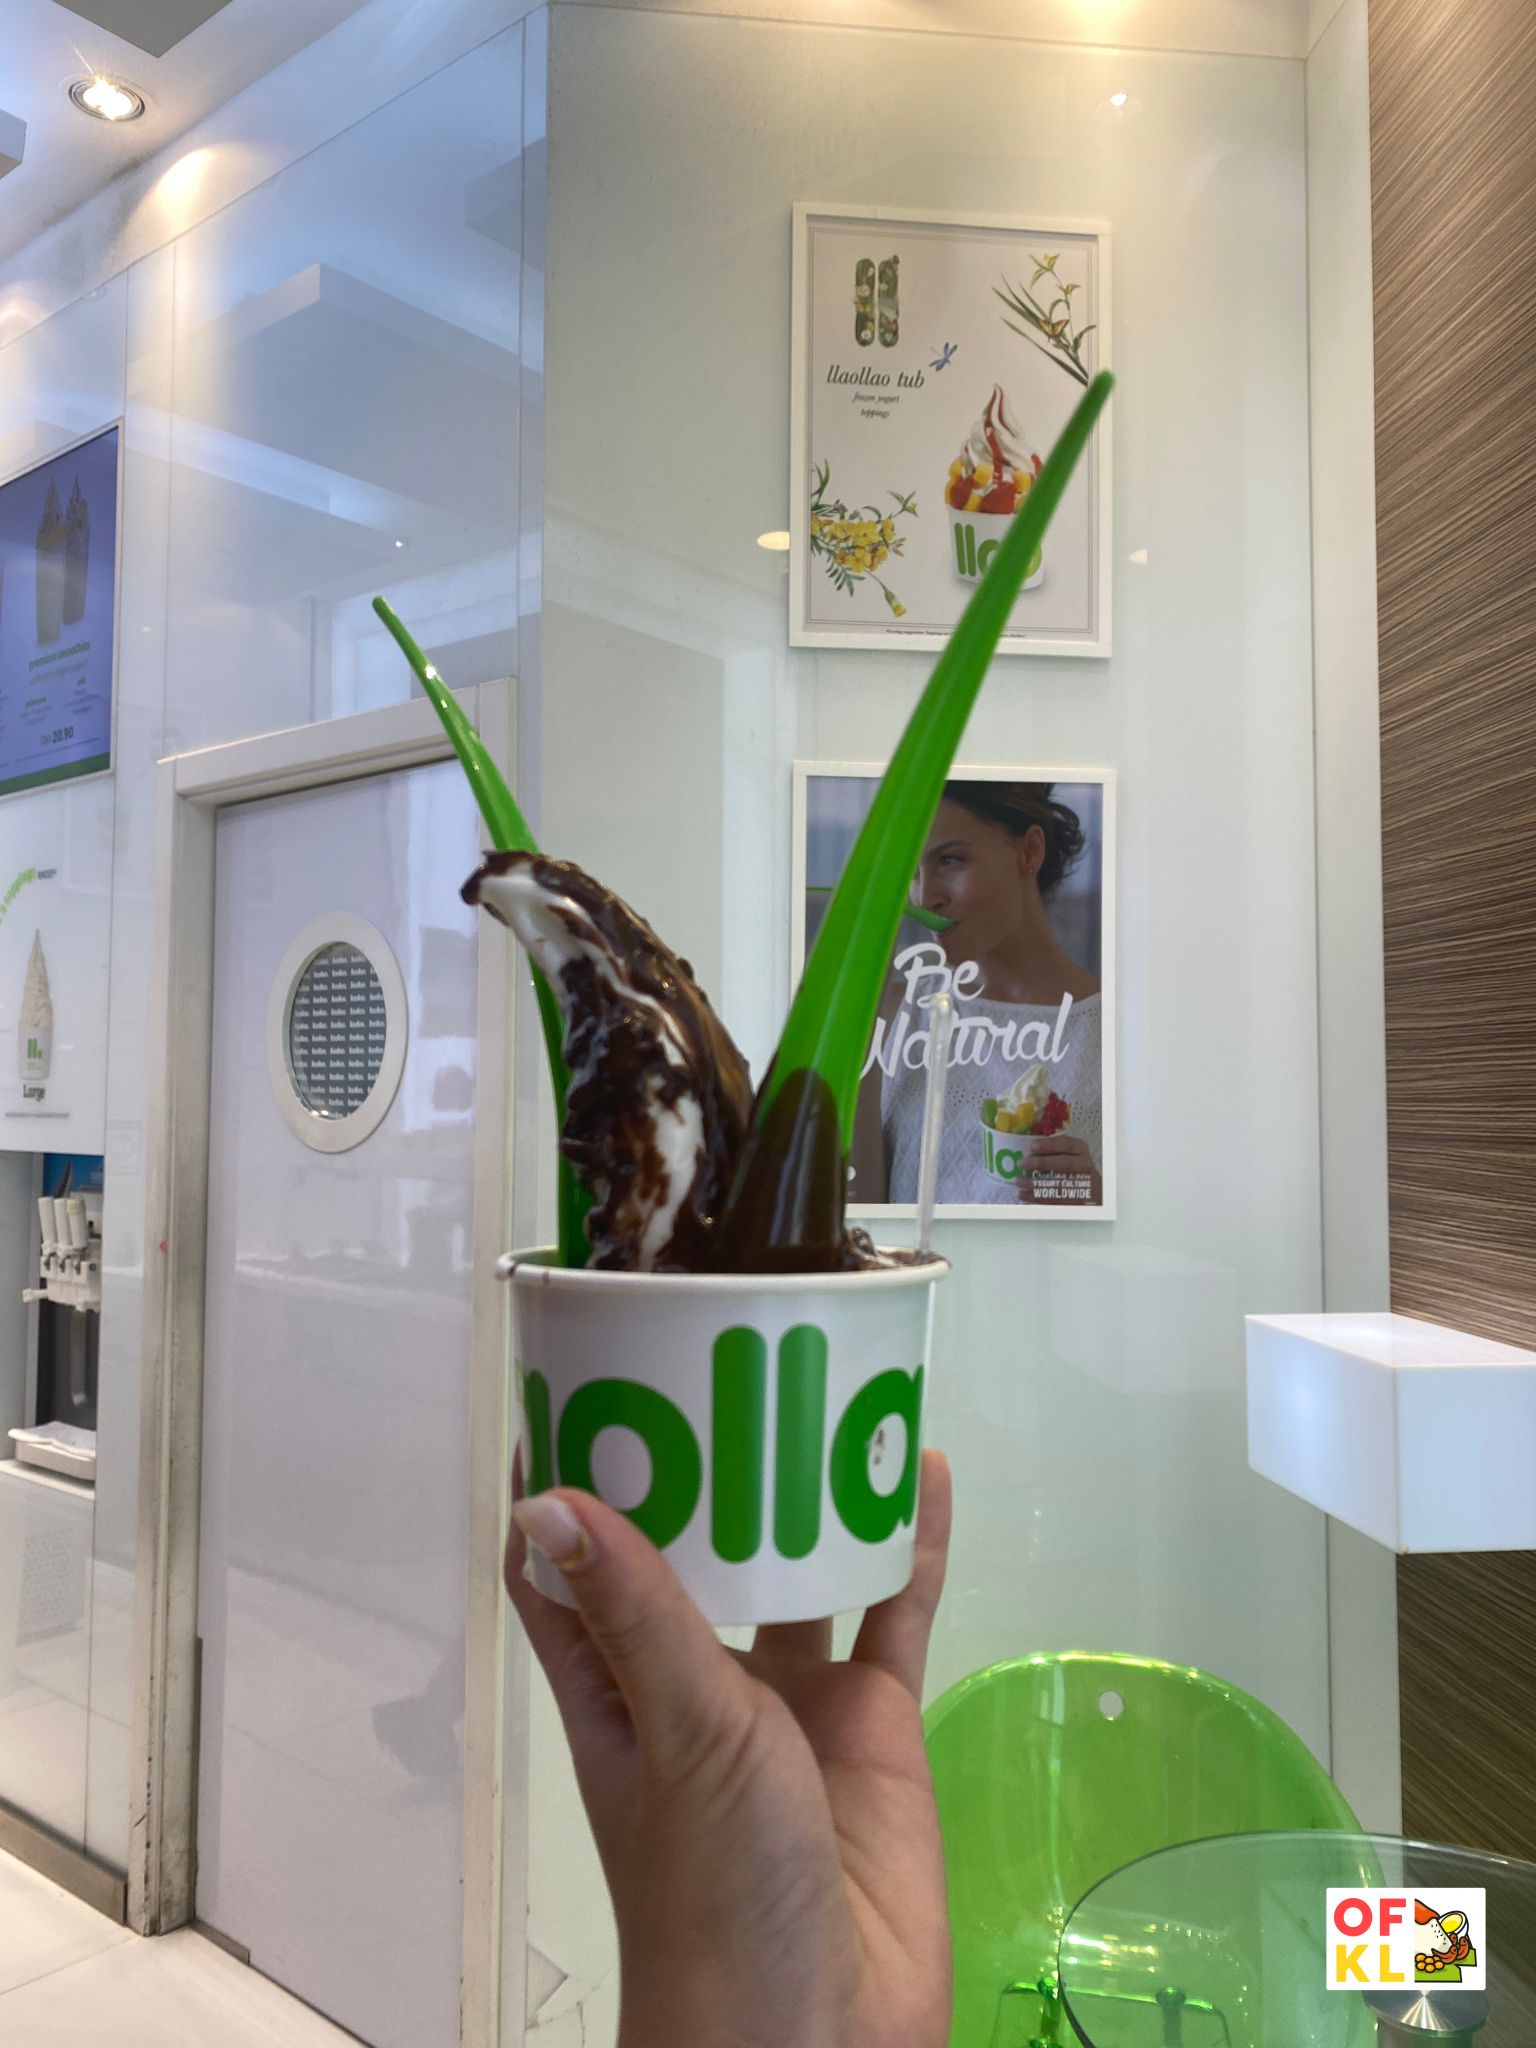 Comparing llaollao and Yolé, which is better? | OnlyFoodKL